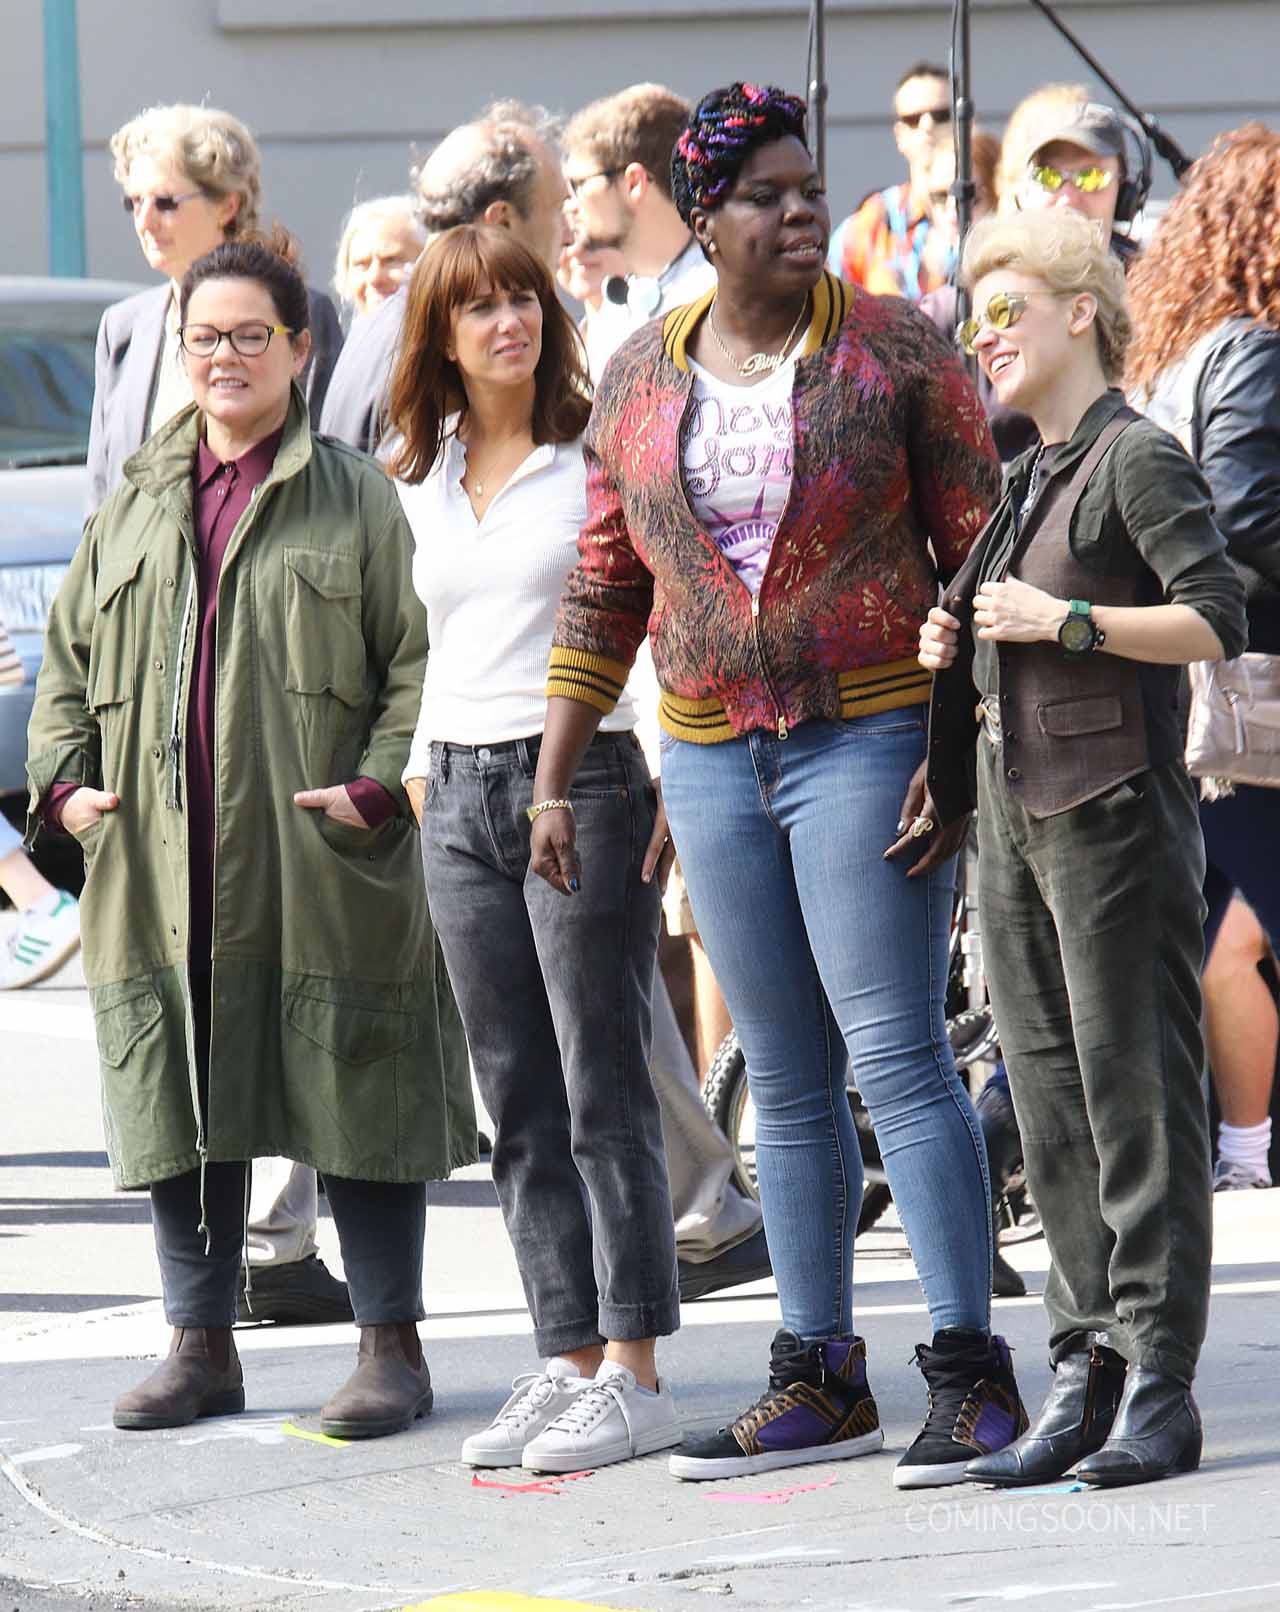 Ghostbusters Photos: A Look at the Final Day of Shooting - Comic Book ...